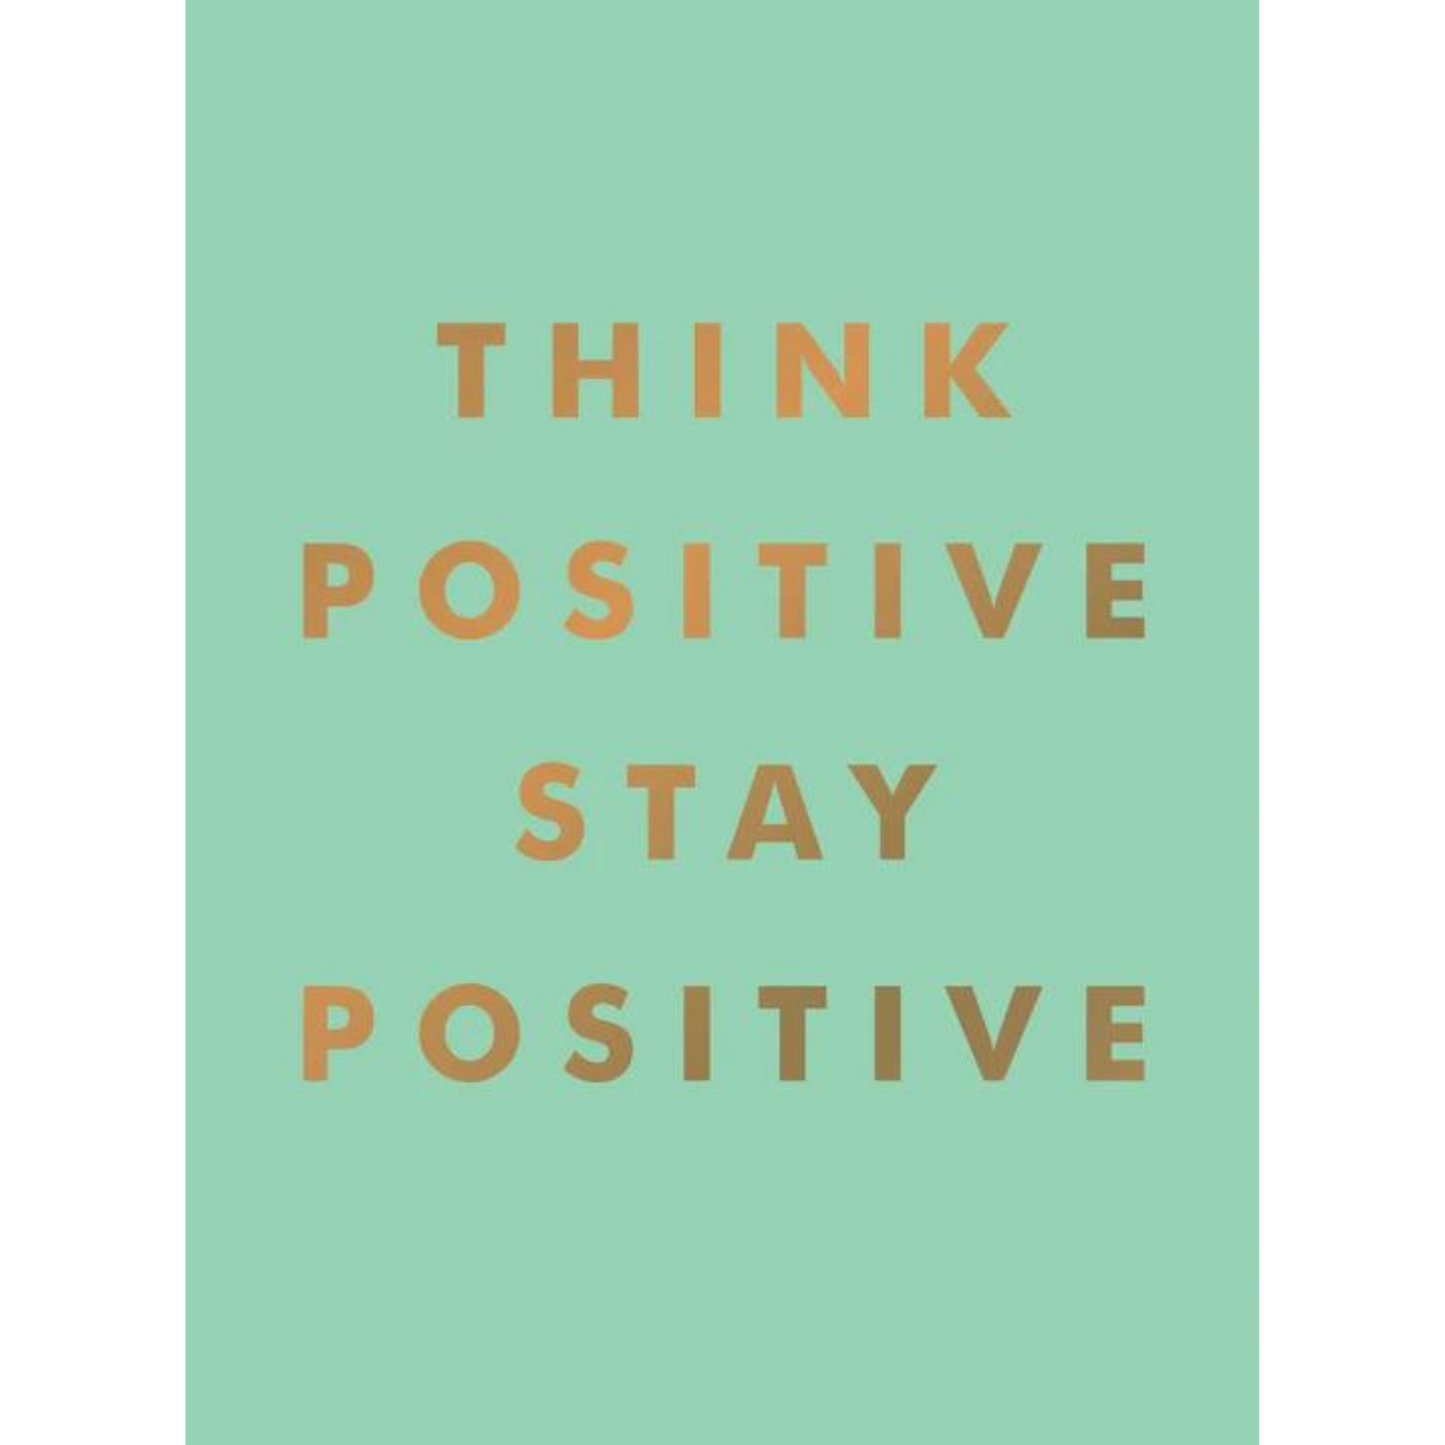 Think Positive, Stay Positive